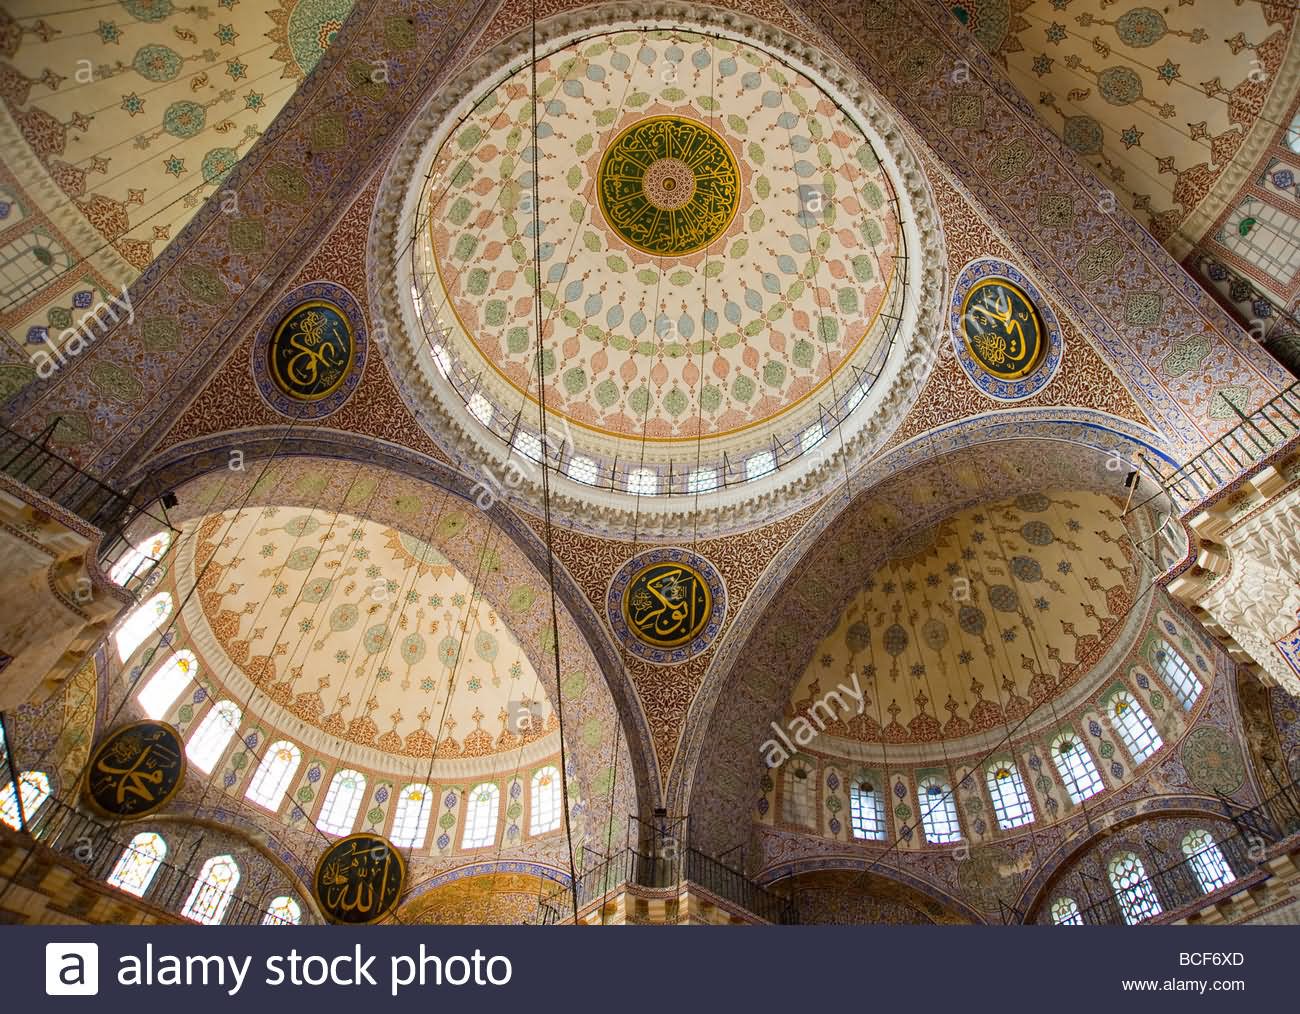 Domes Inside The Yeni Cami Mosque In Istanbul